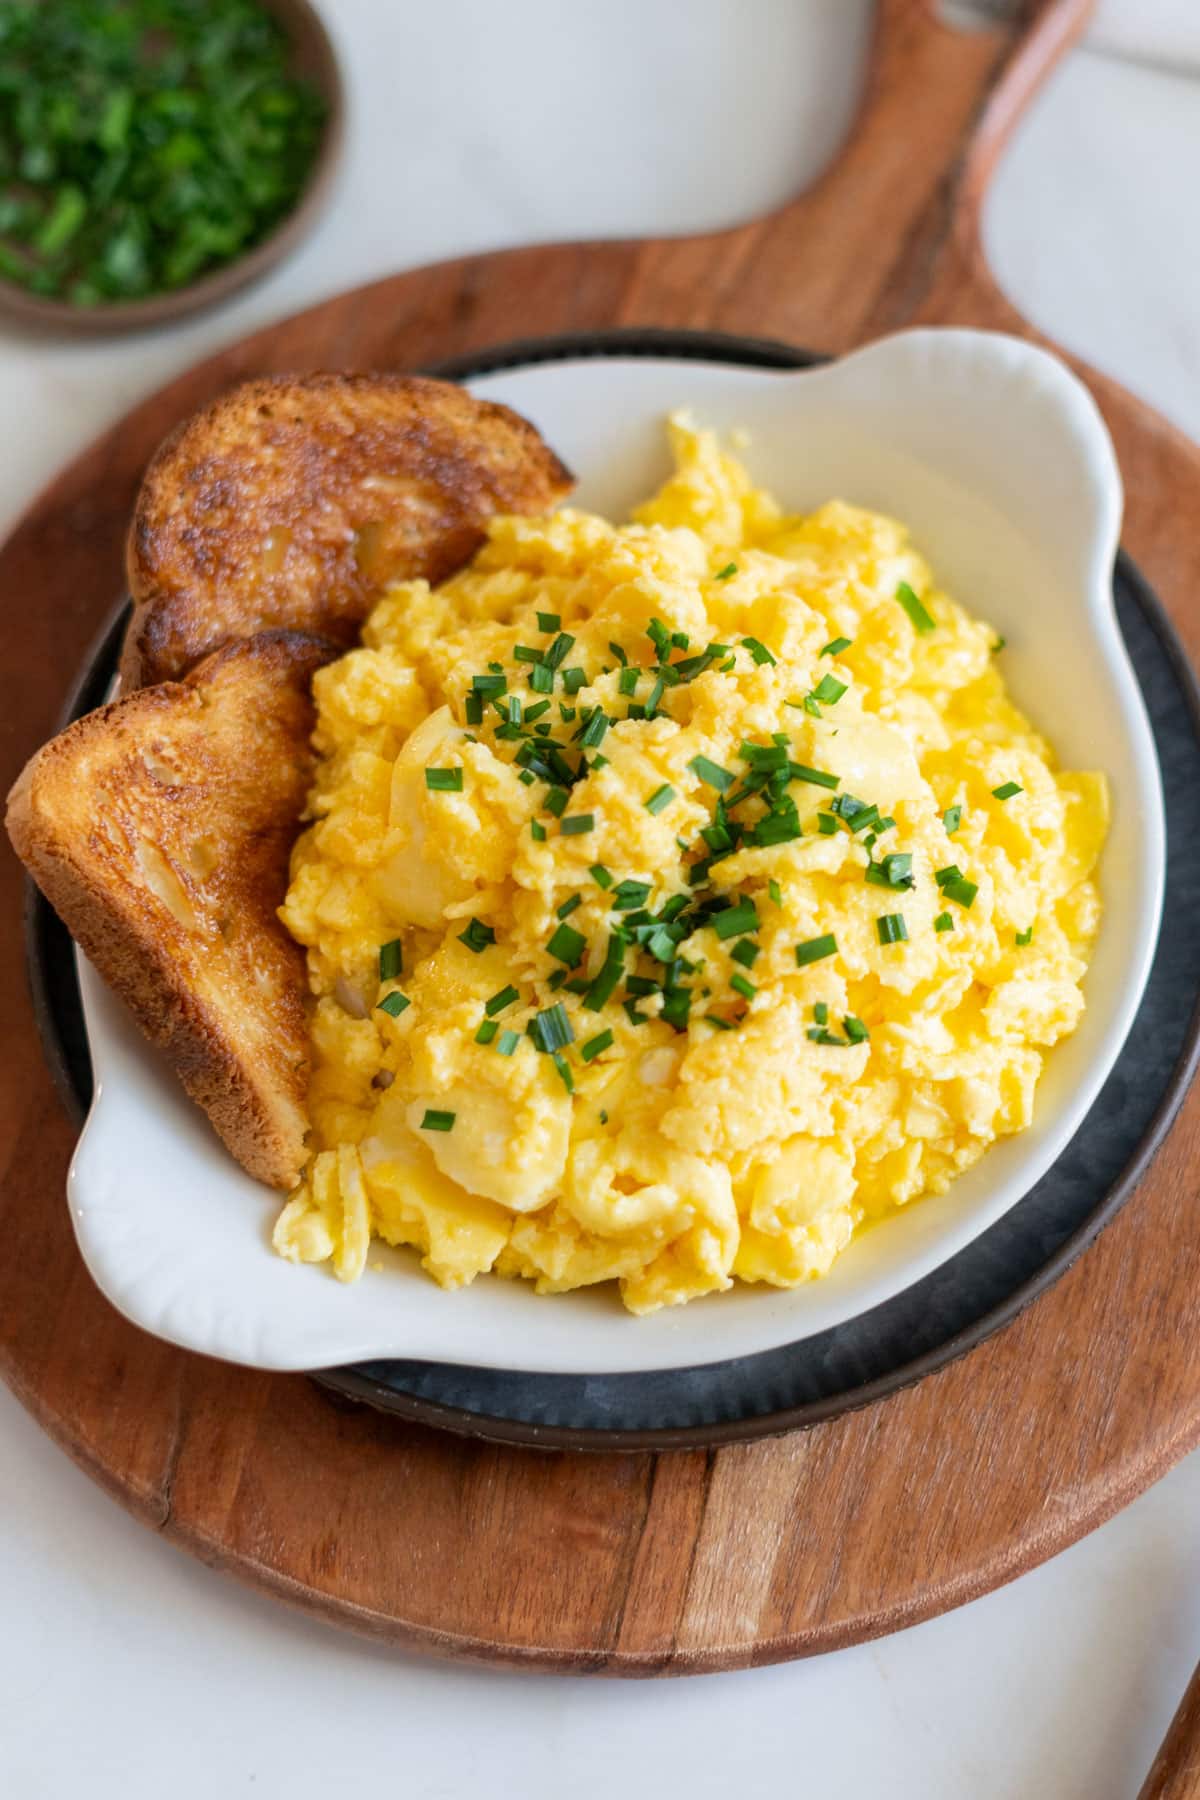 Eggs and toast on a plate.